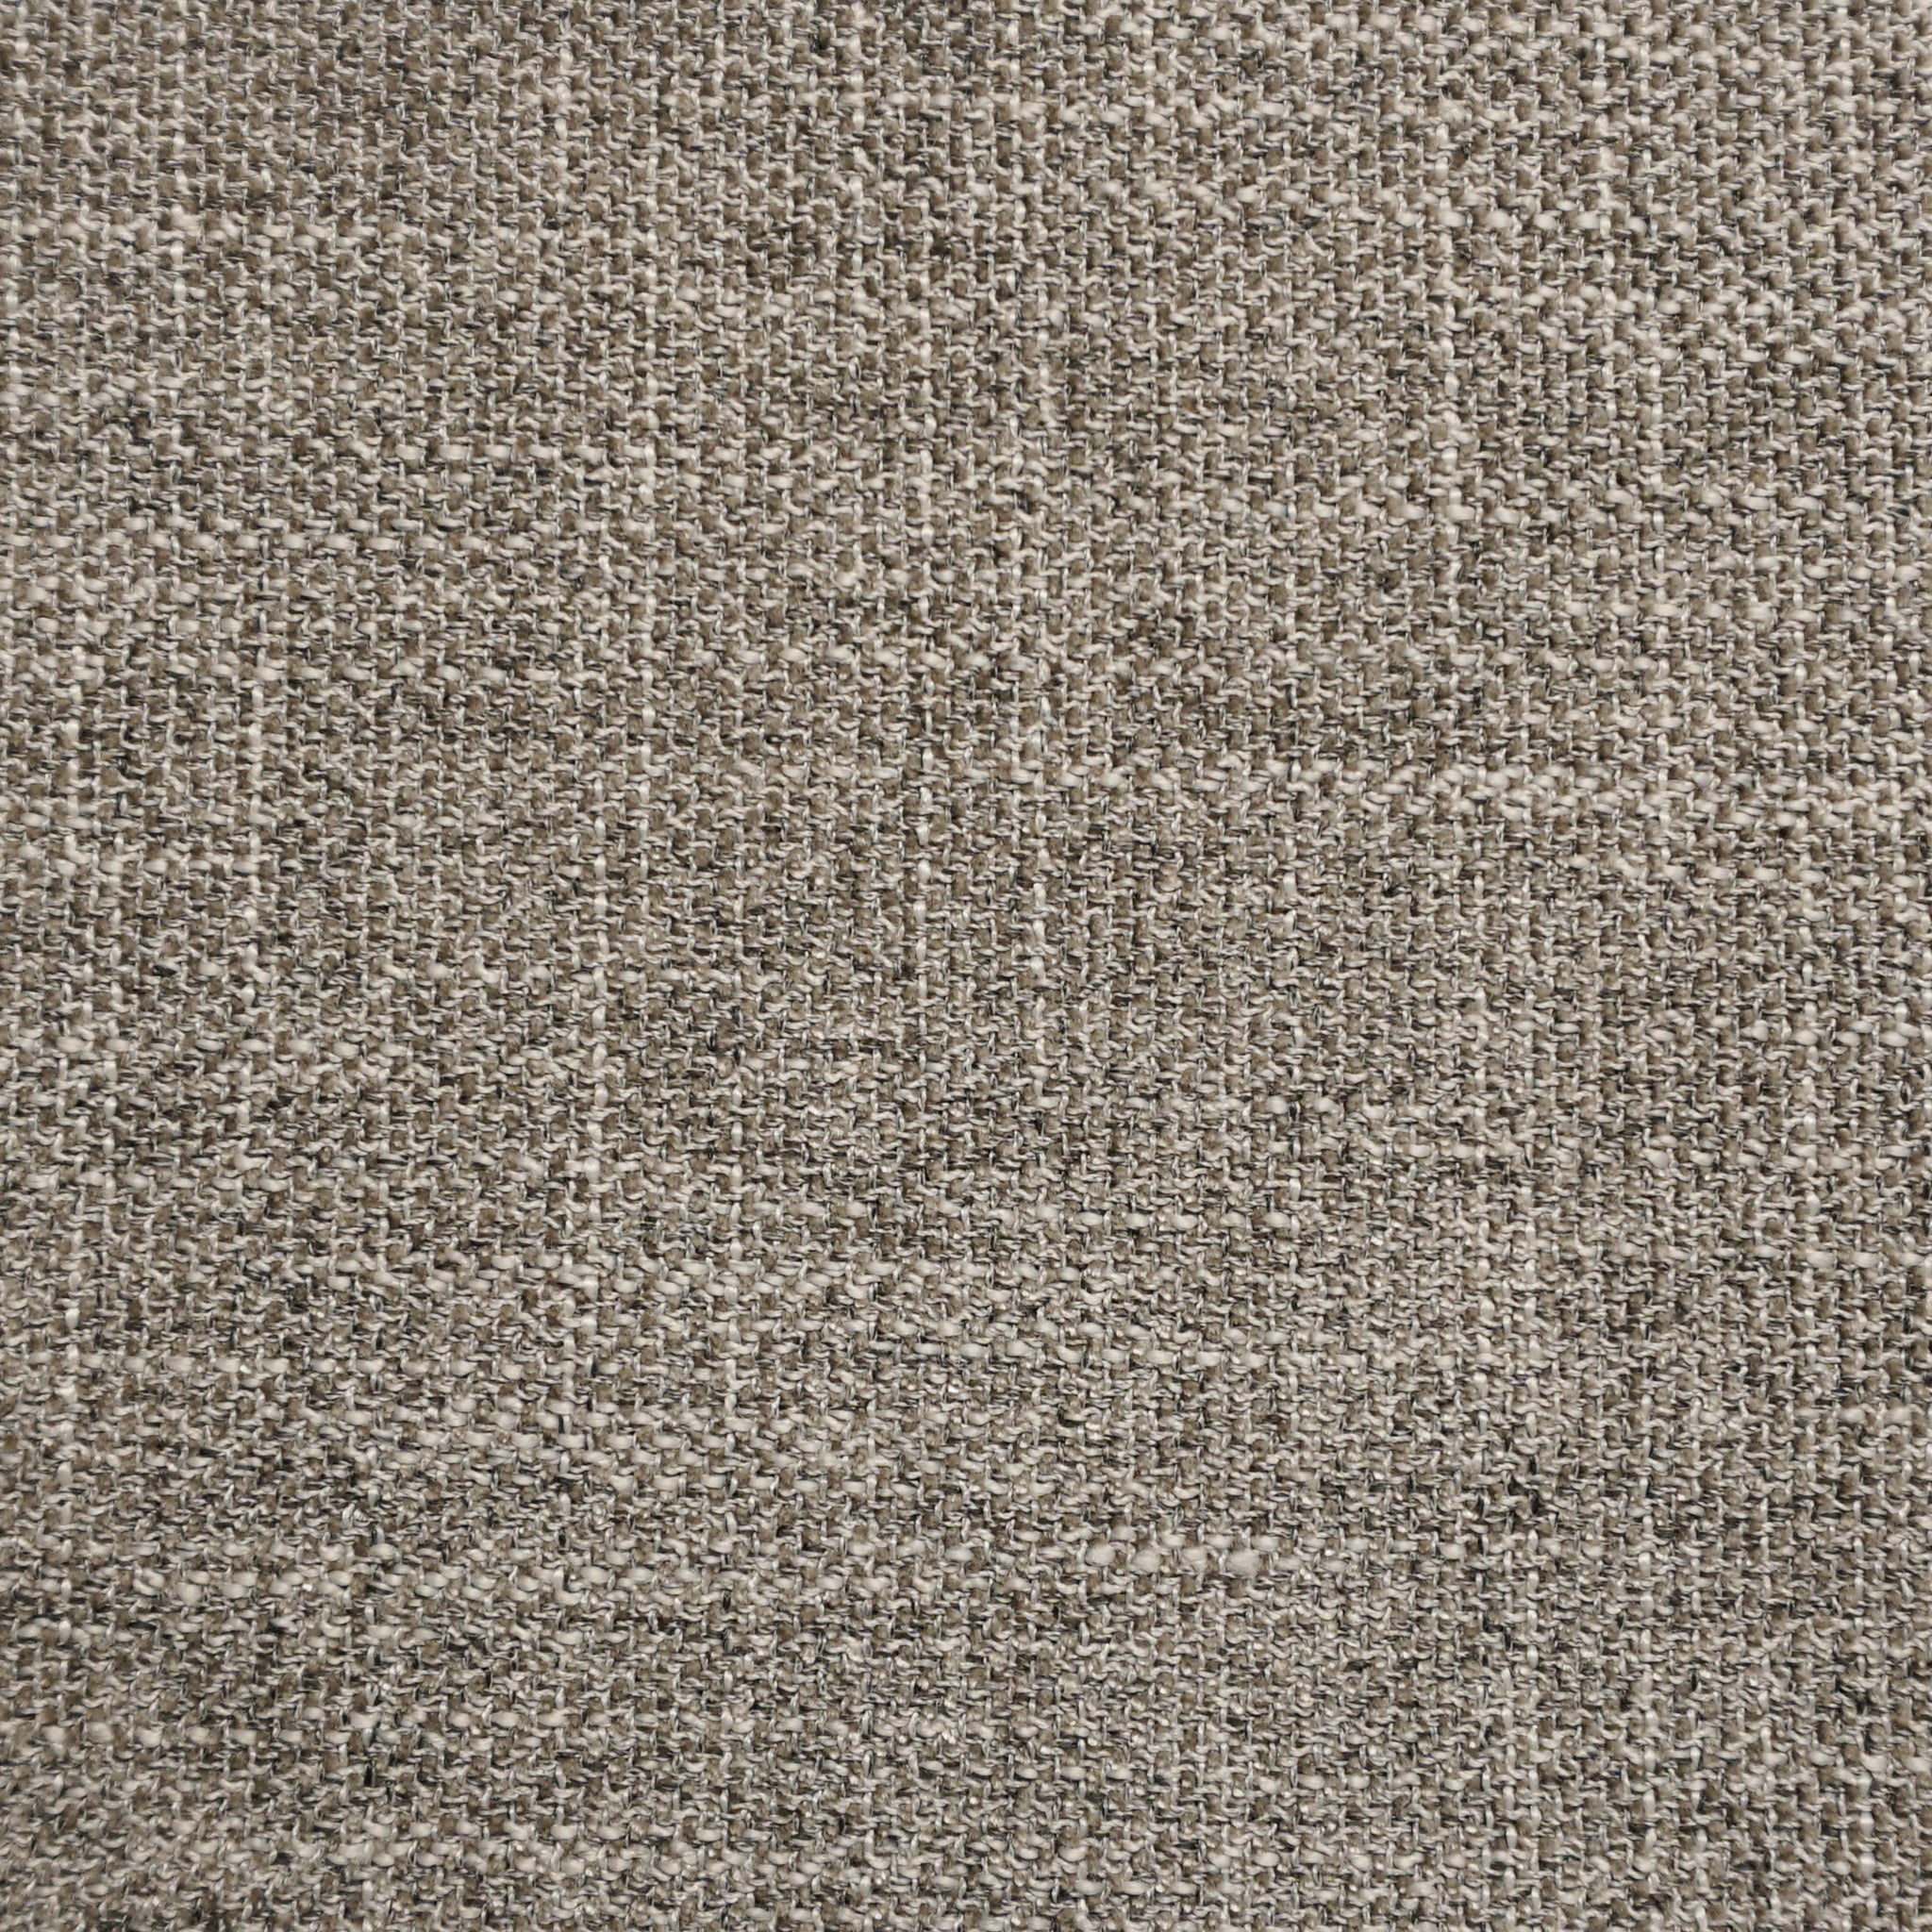 M10717 Shearling Chenille  Fabric Store - Discount Fabric by the Yard